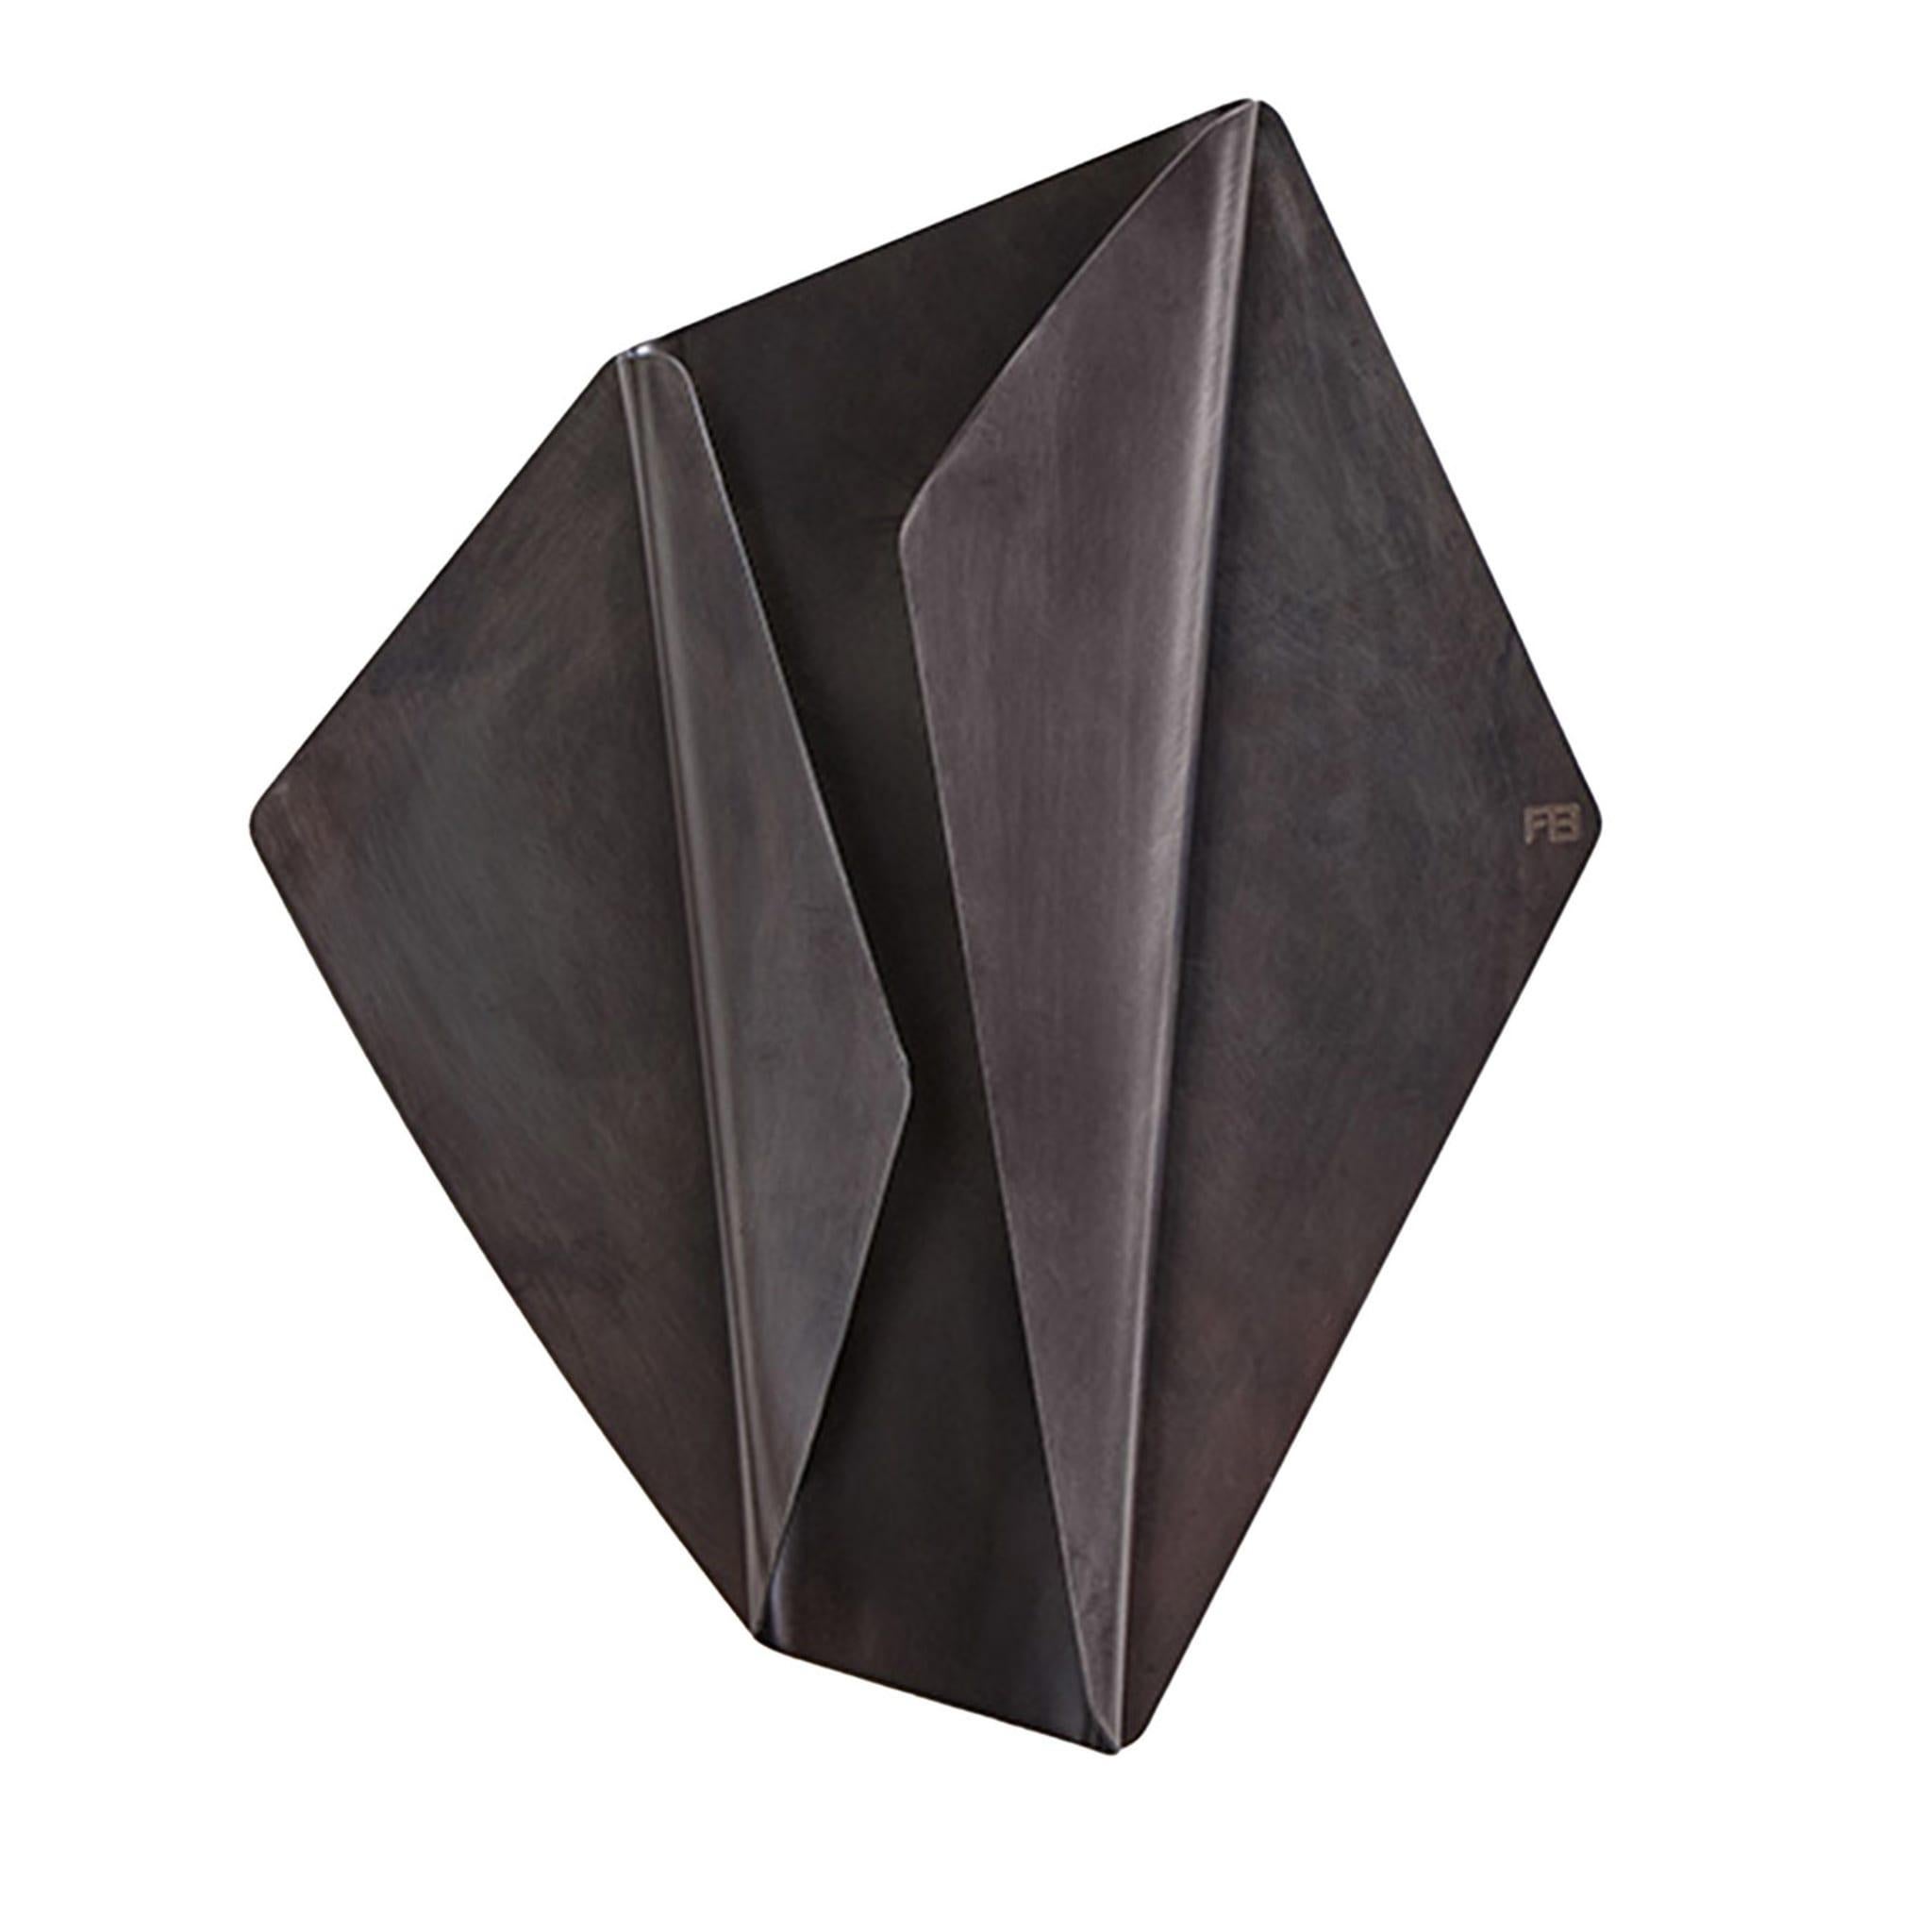 Wall lamp designed in two configurations and two different sizes, composed of curved laser-cut metal sheets available in different finishes: burnished brass, bronze, and graphite. Double ignition on two folded metal plates. Grafite varnished metal.